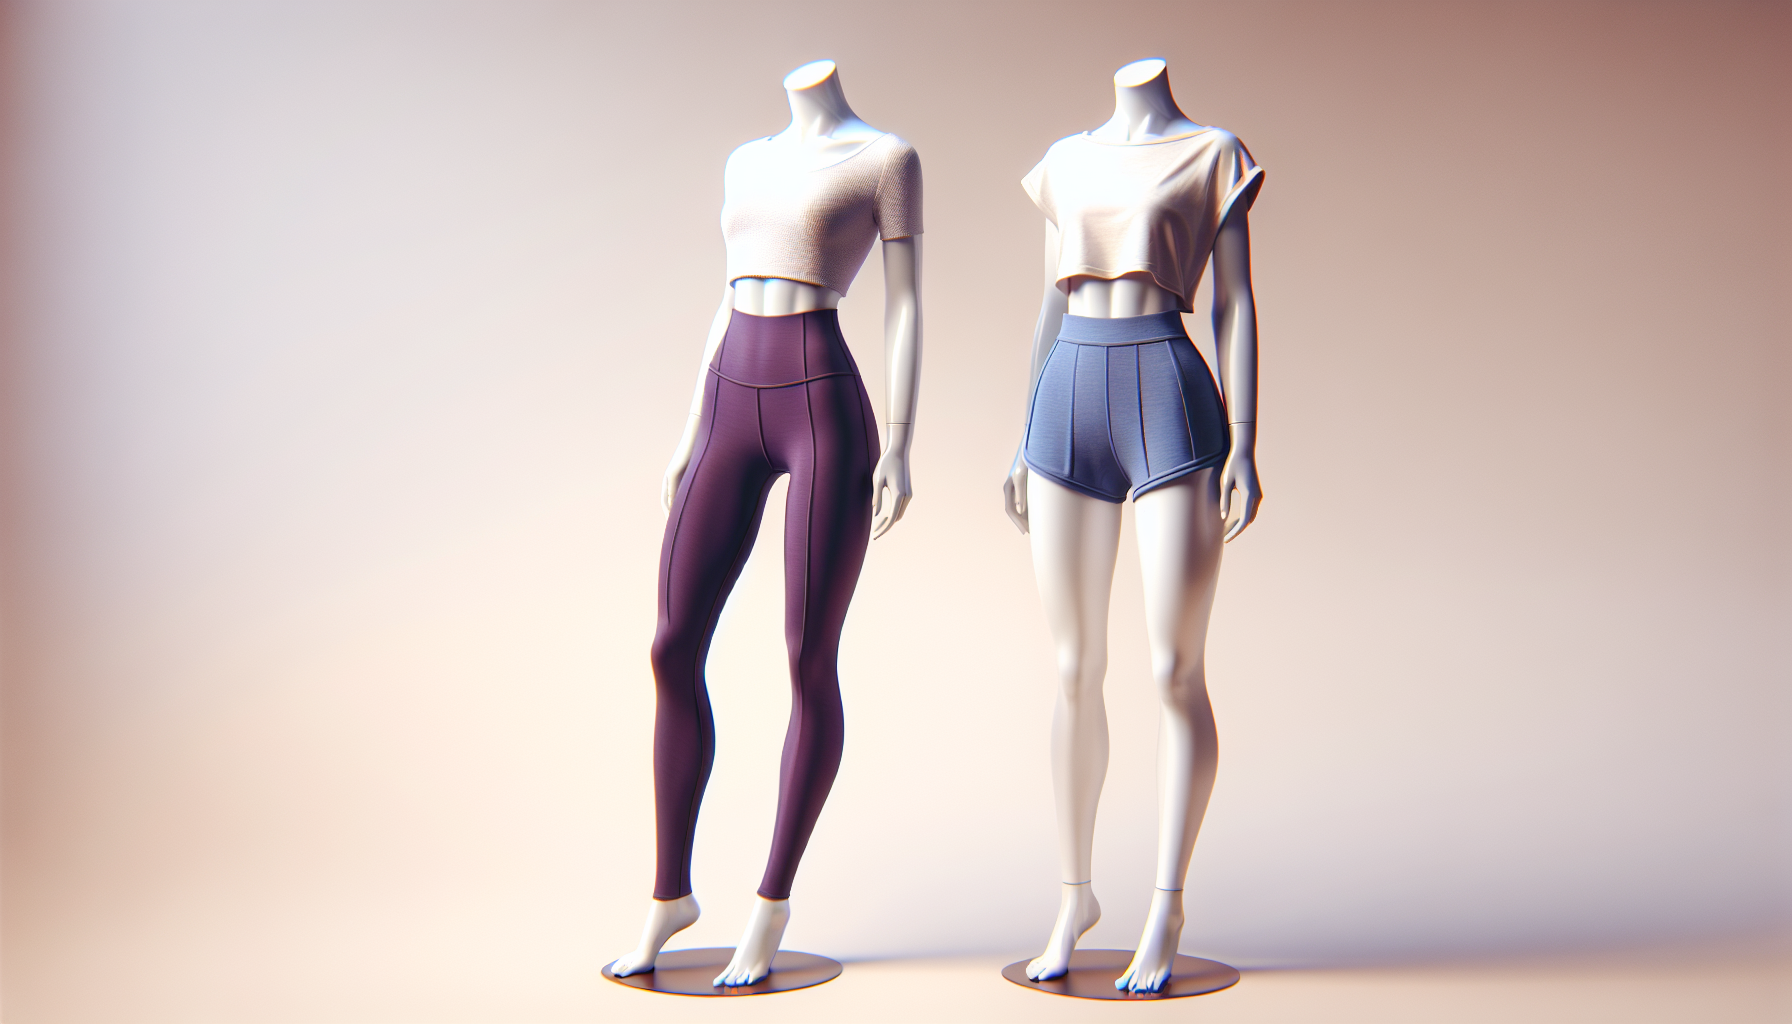 Comparison of leggings and shorts for gym workouts